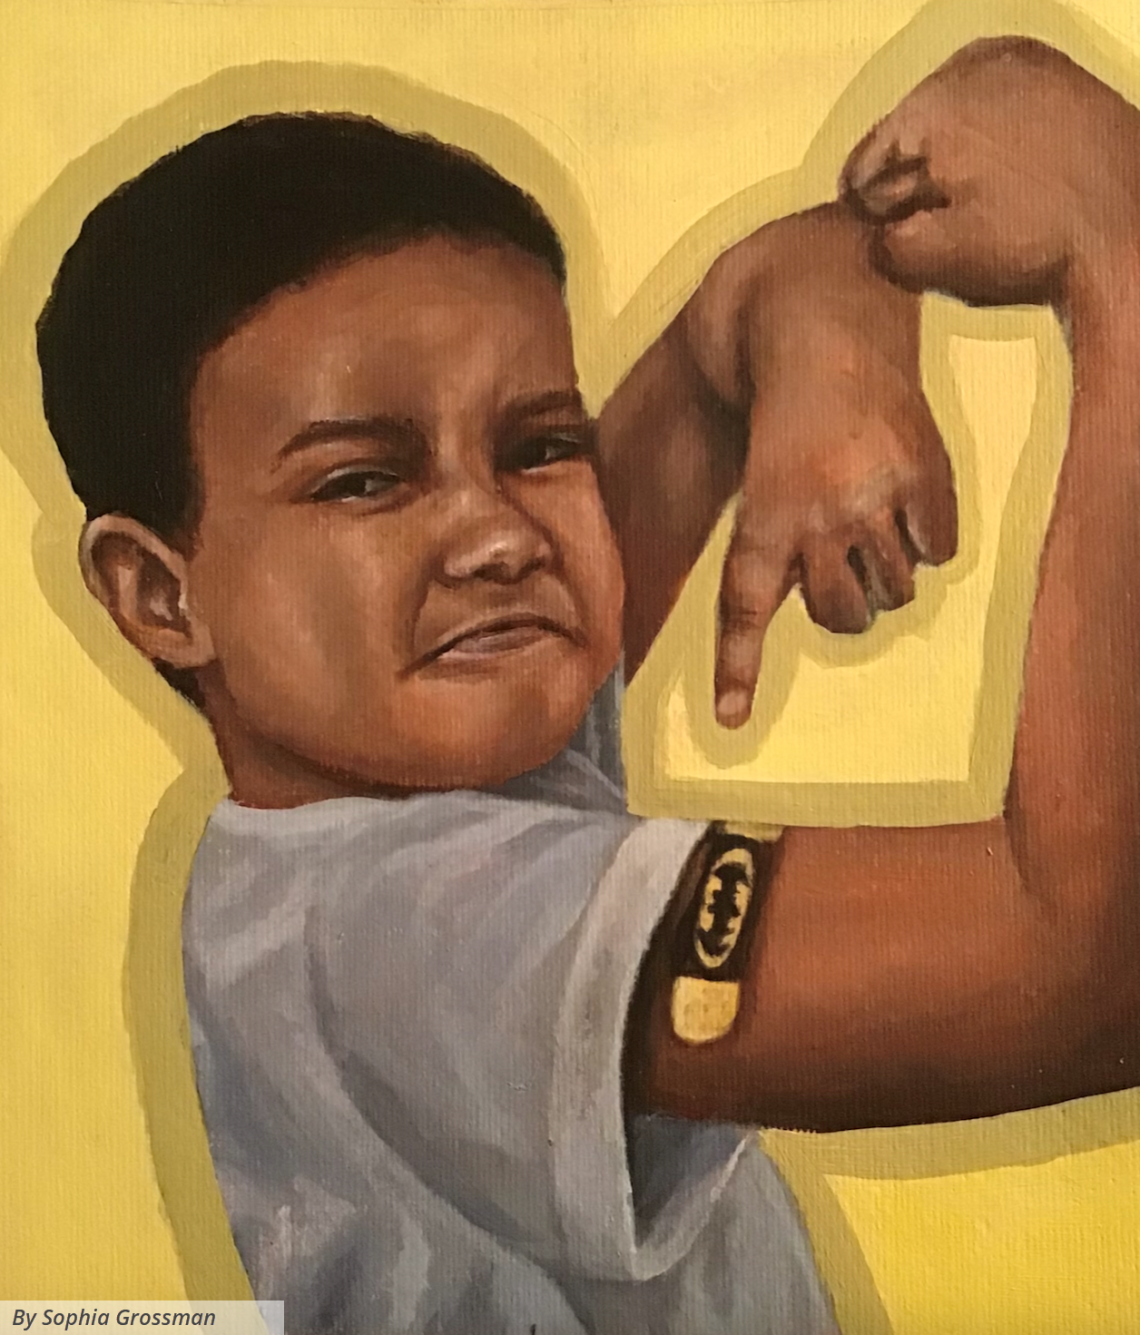 In this painting, a young boy flexes and points to his bicep muscle, which has a Batman bandage to show that getting vaccinated is like being a superhero.